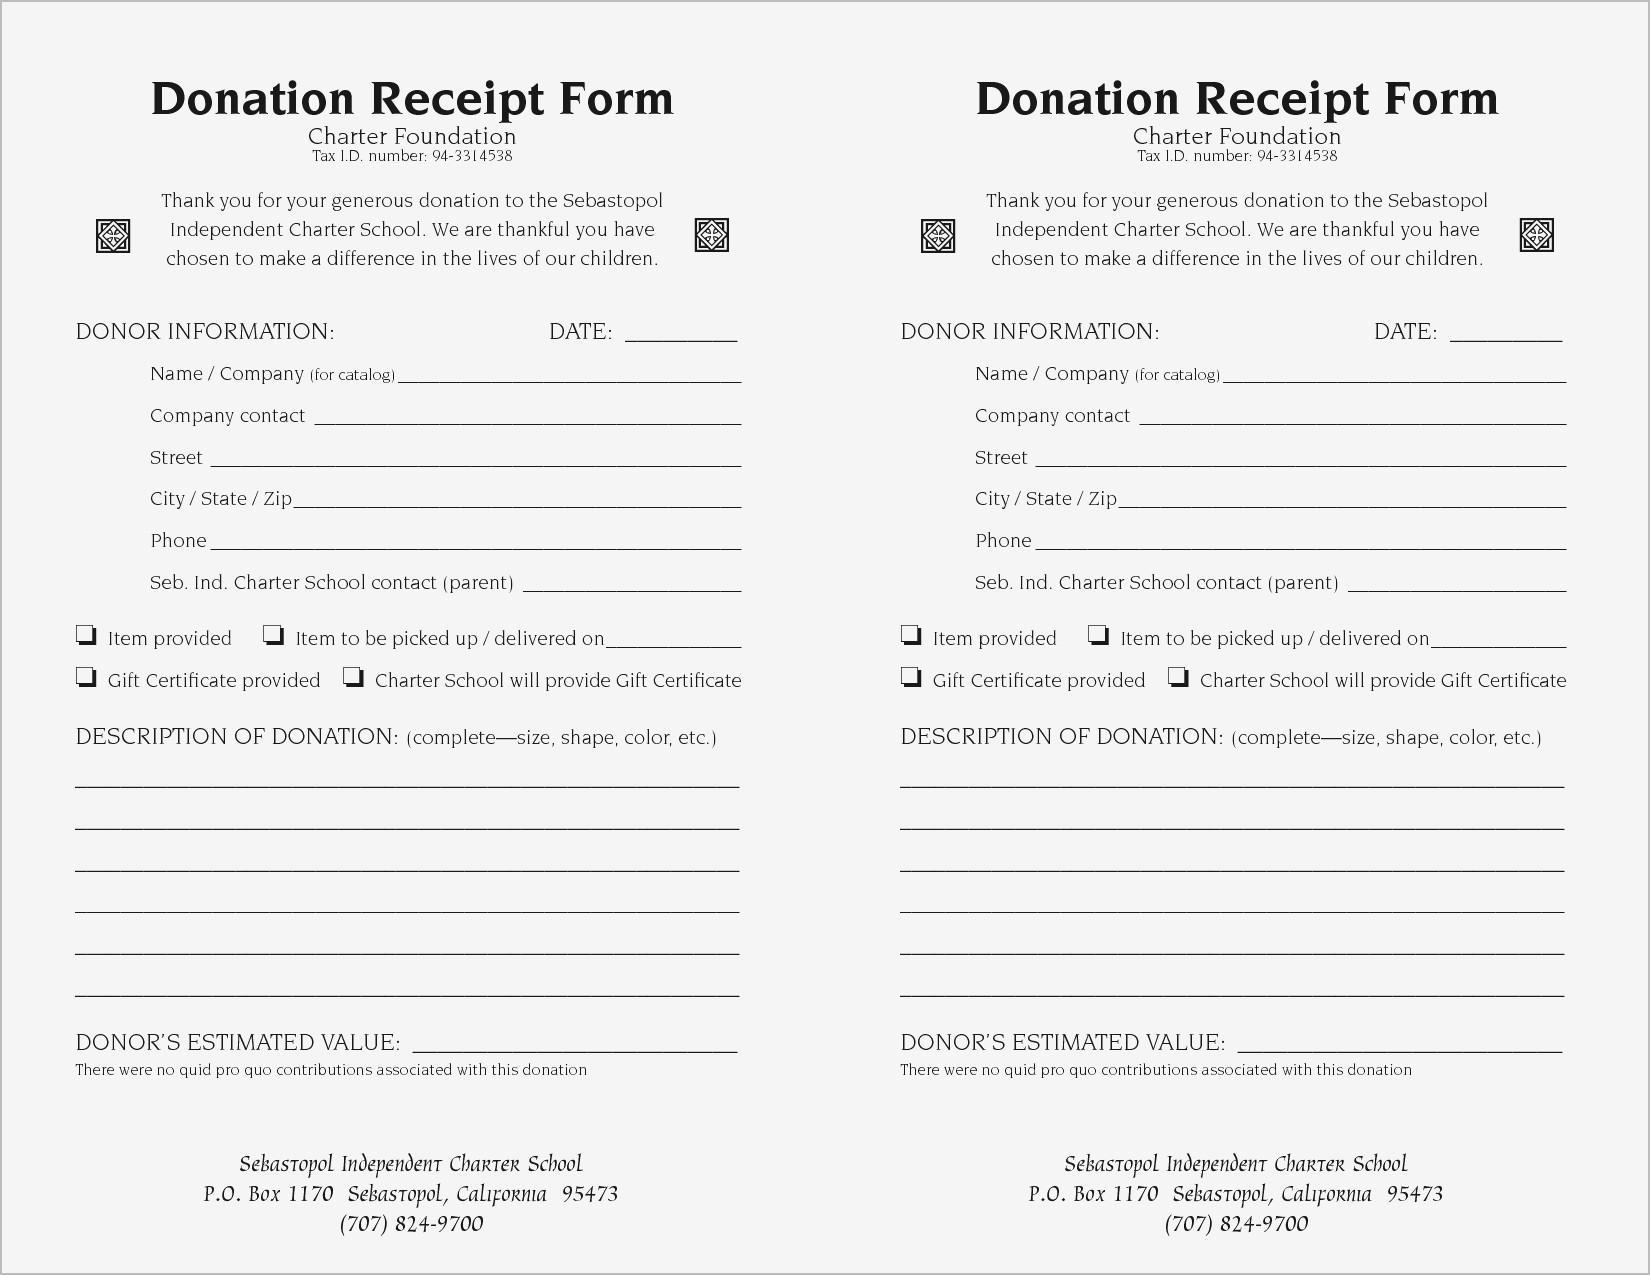 sample-donation-receipt-letter-for-tax-purposes-flilpfloppinthrough-17-donation-receipt-letter